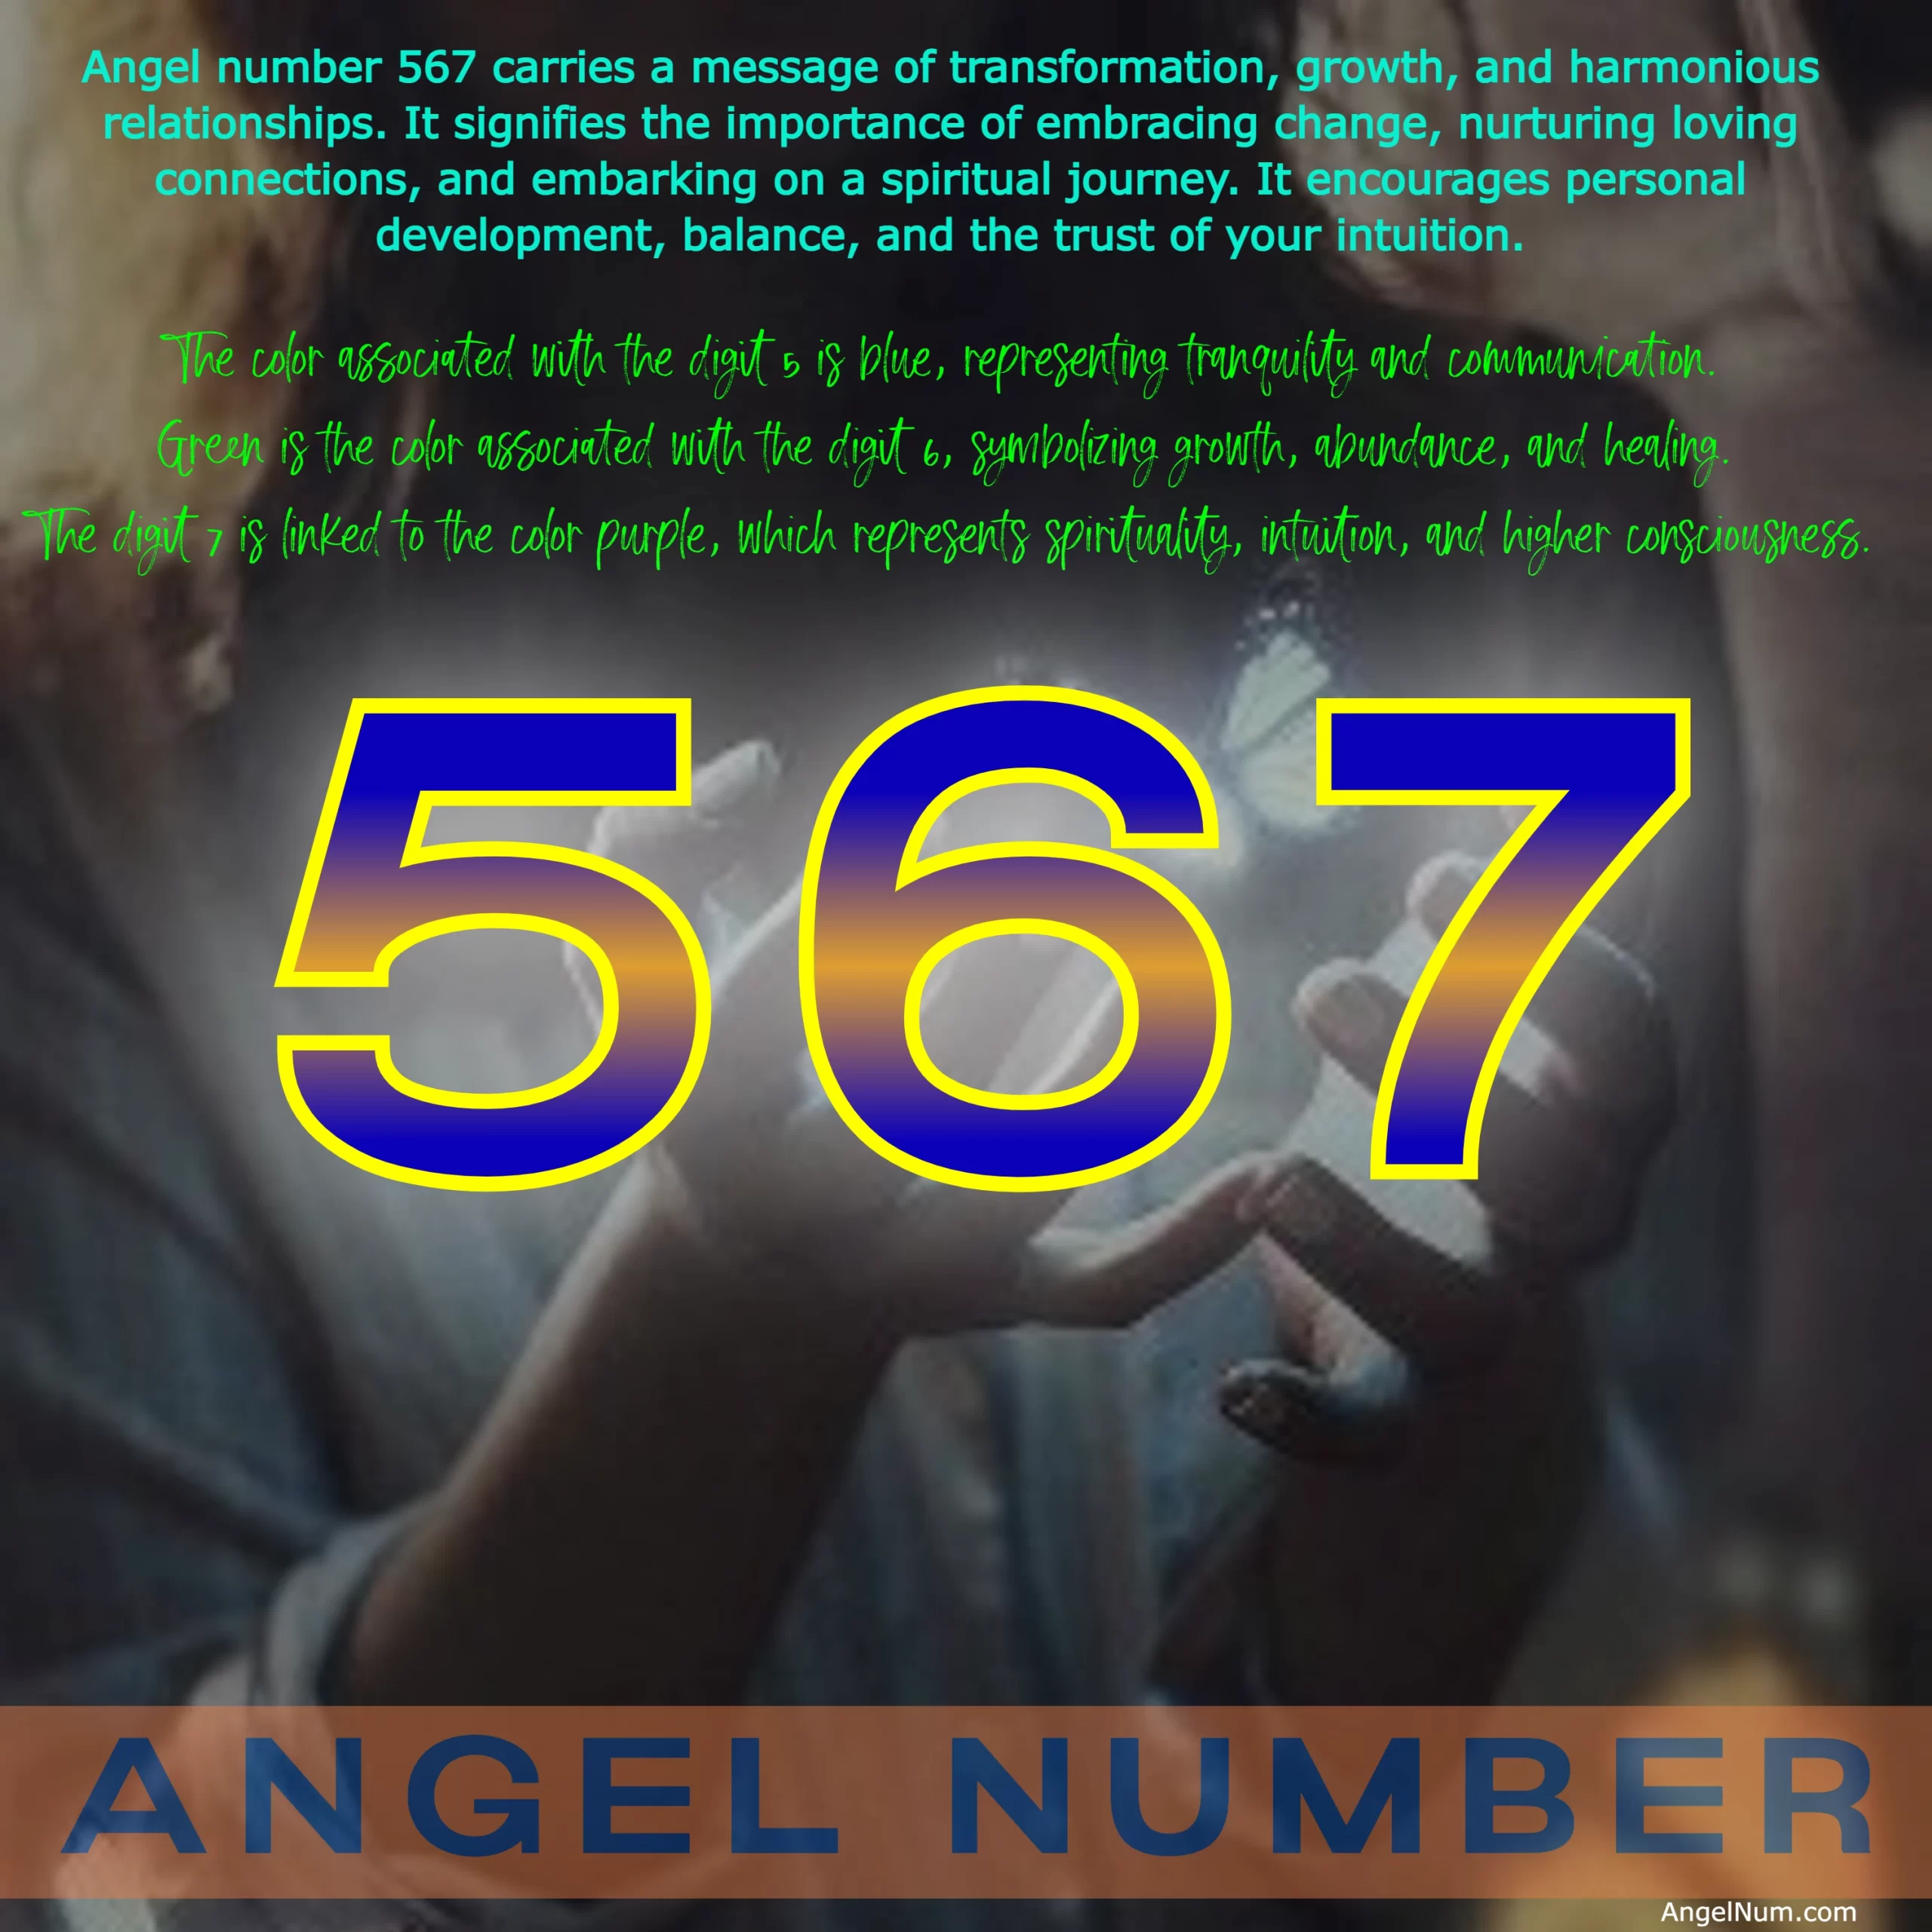 Angel Number 567: Messages of Transformation and Harmony